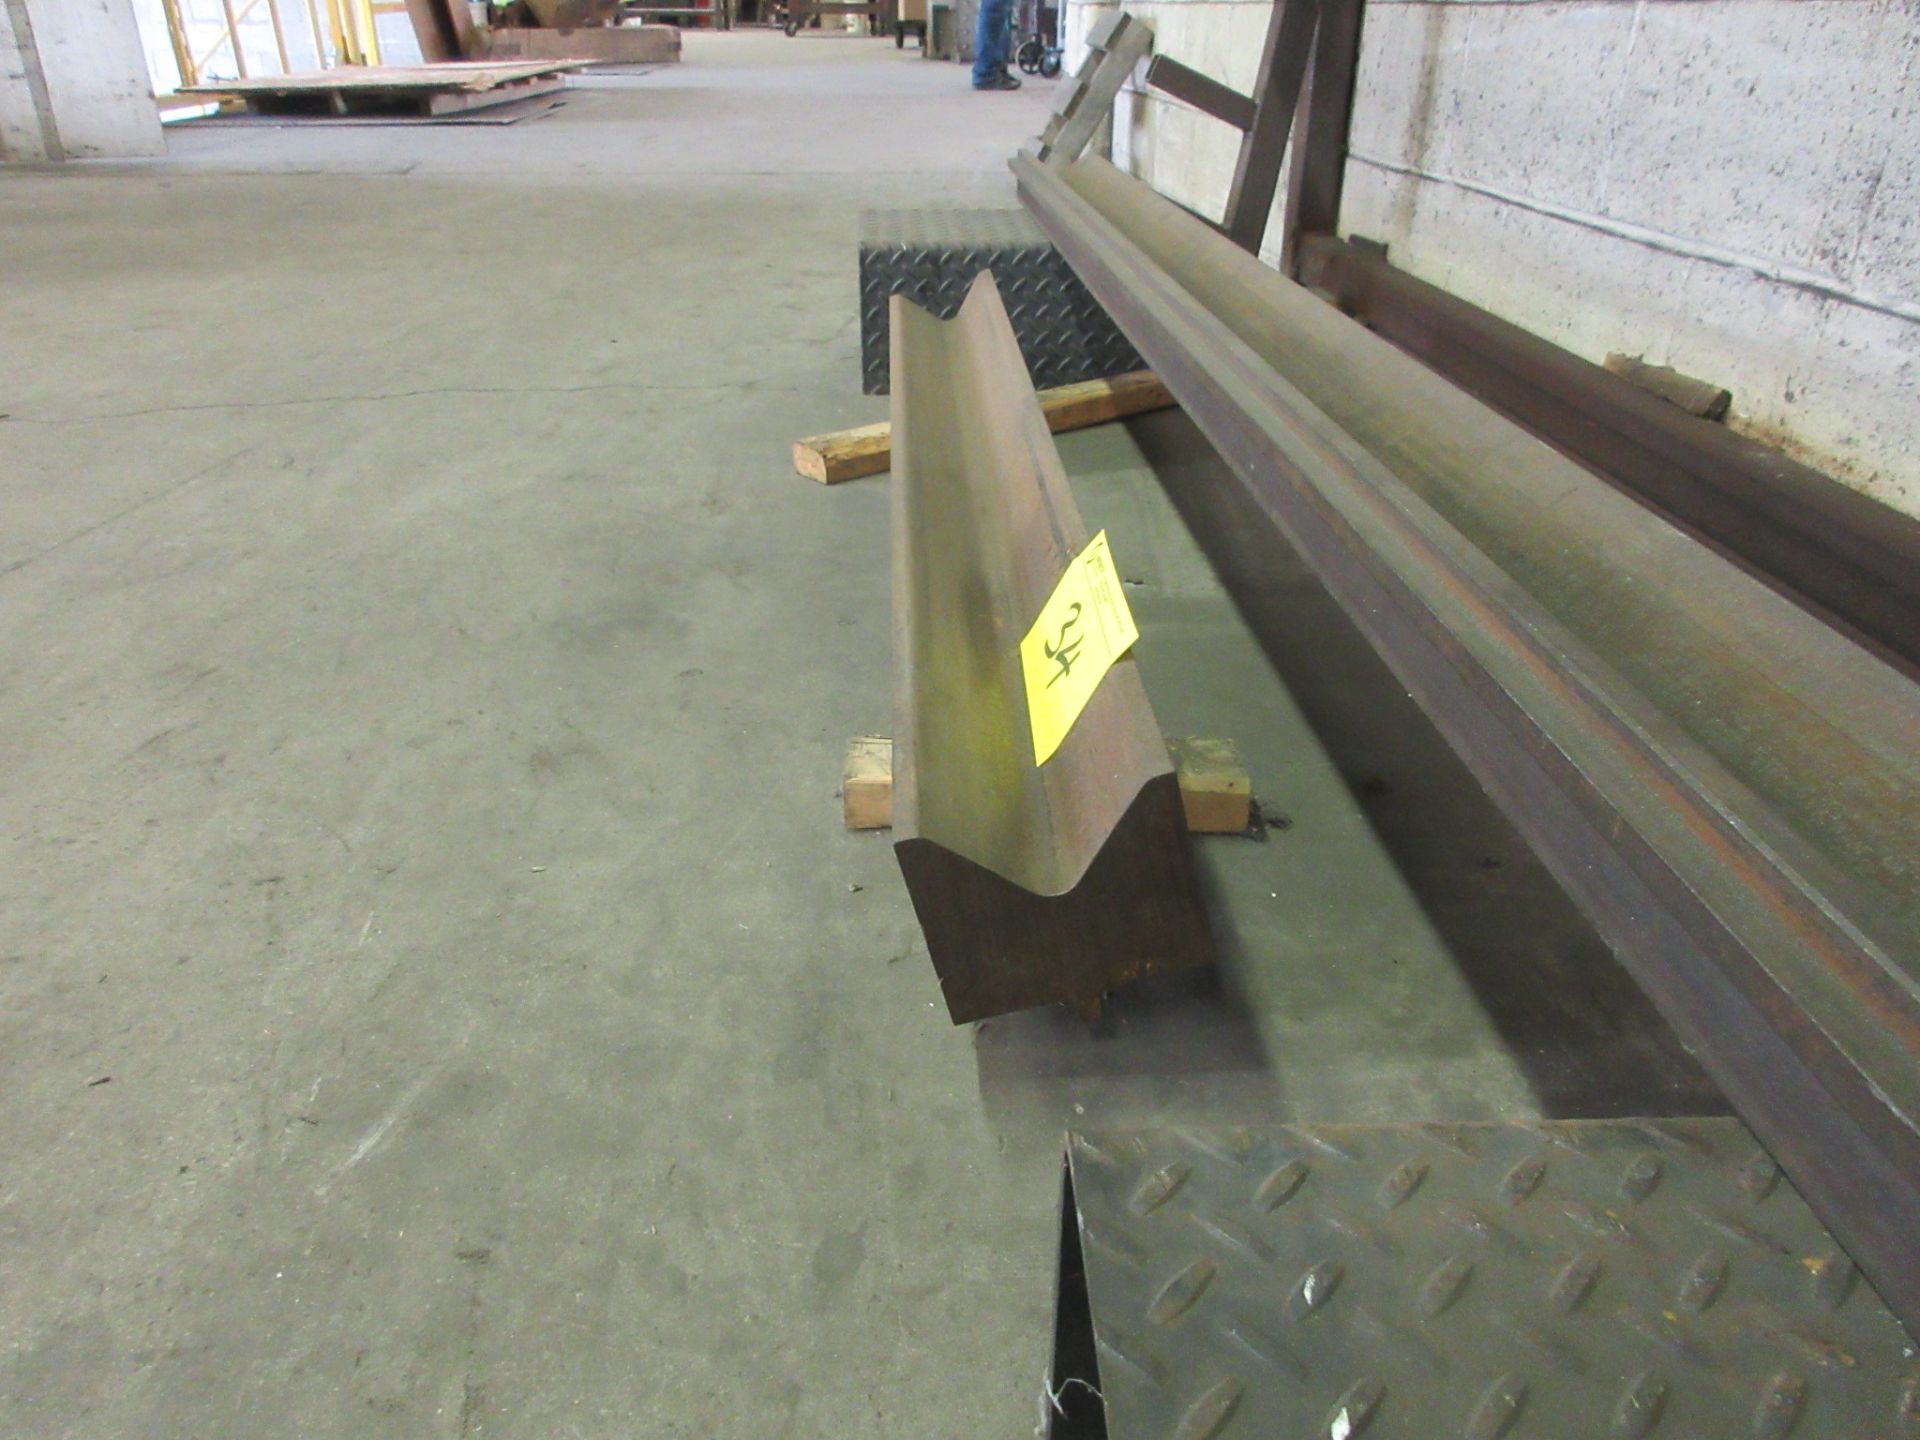 LOT OF (2) PRESS BRAKE DIES (8'L TOP AND 50"L BOTTOM) - Image 3 of 3